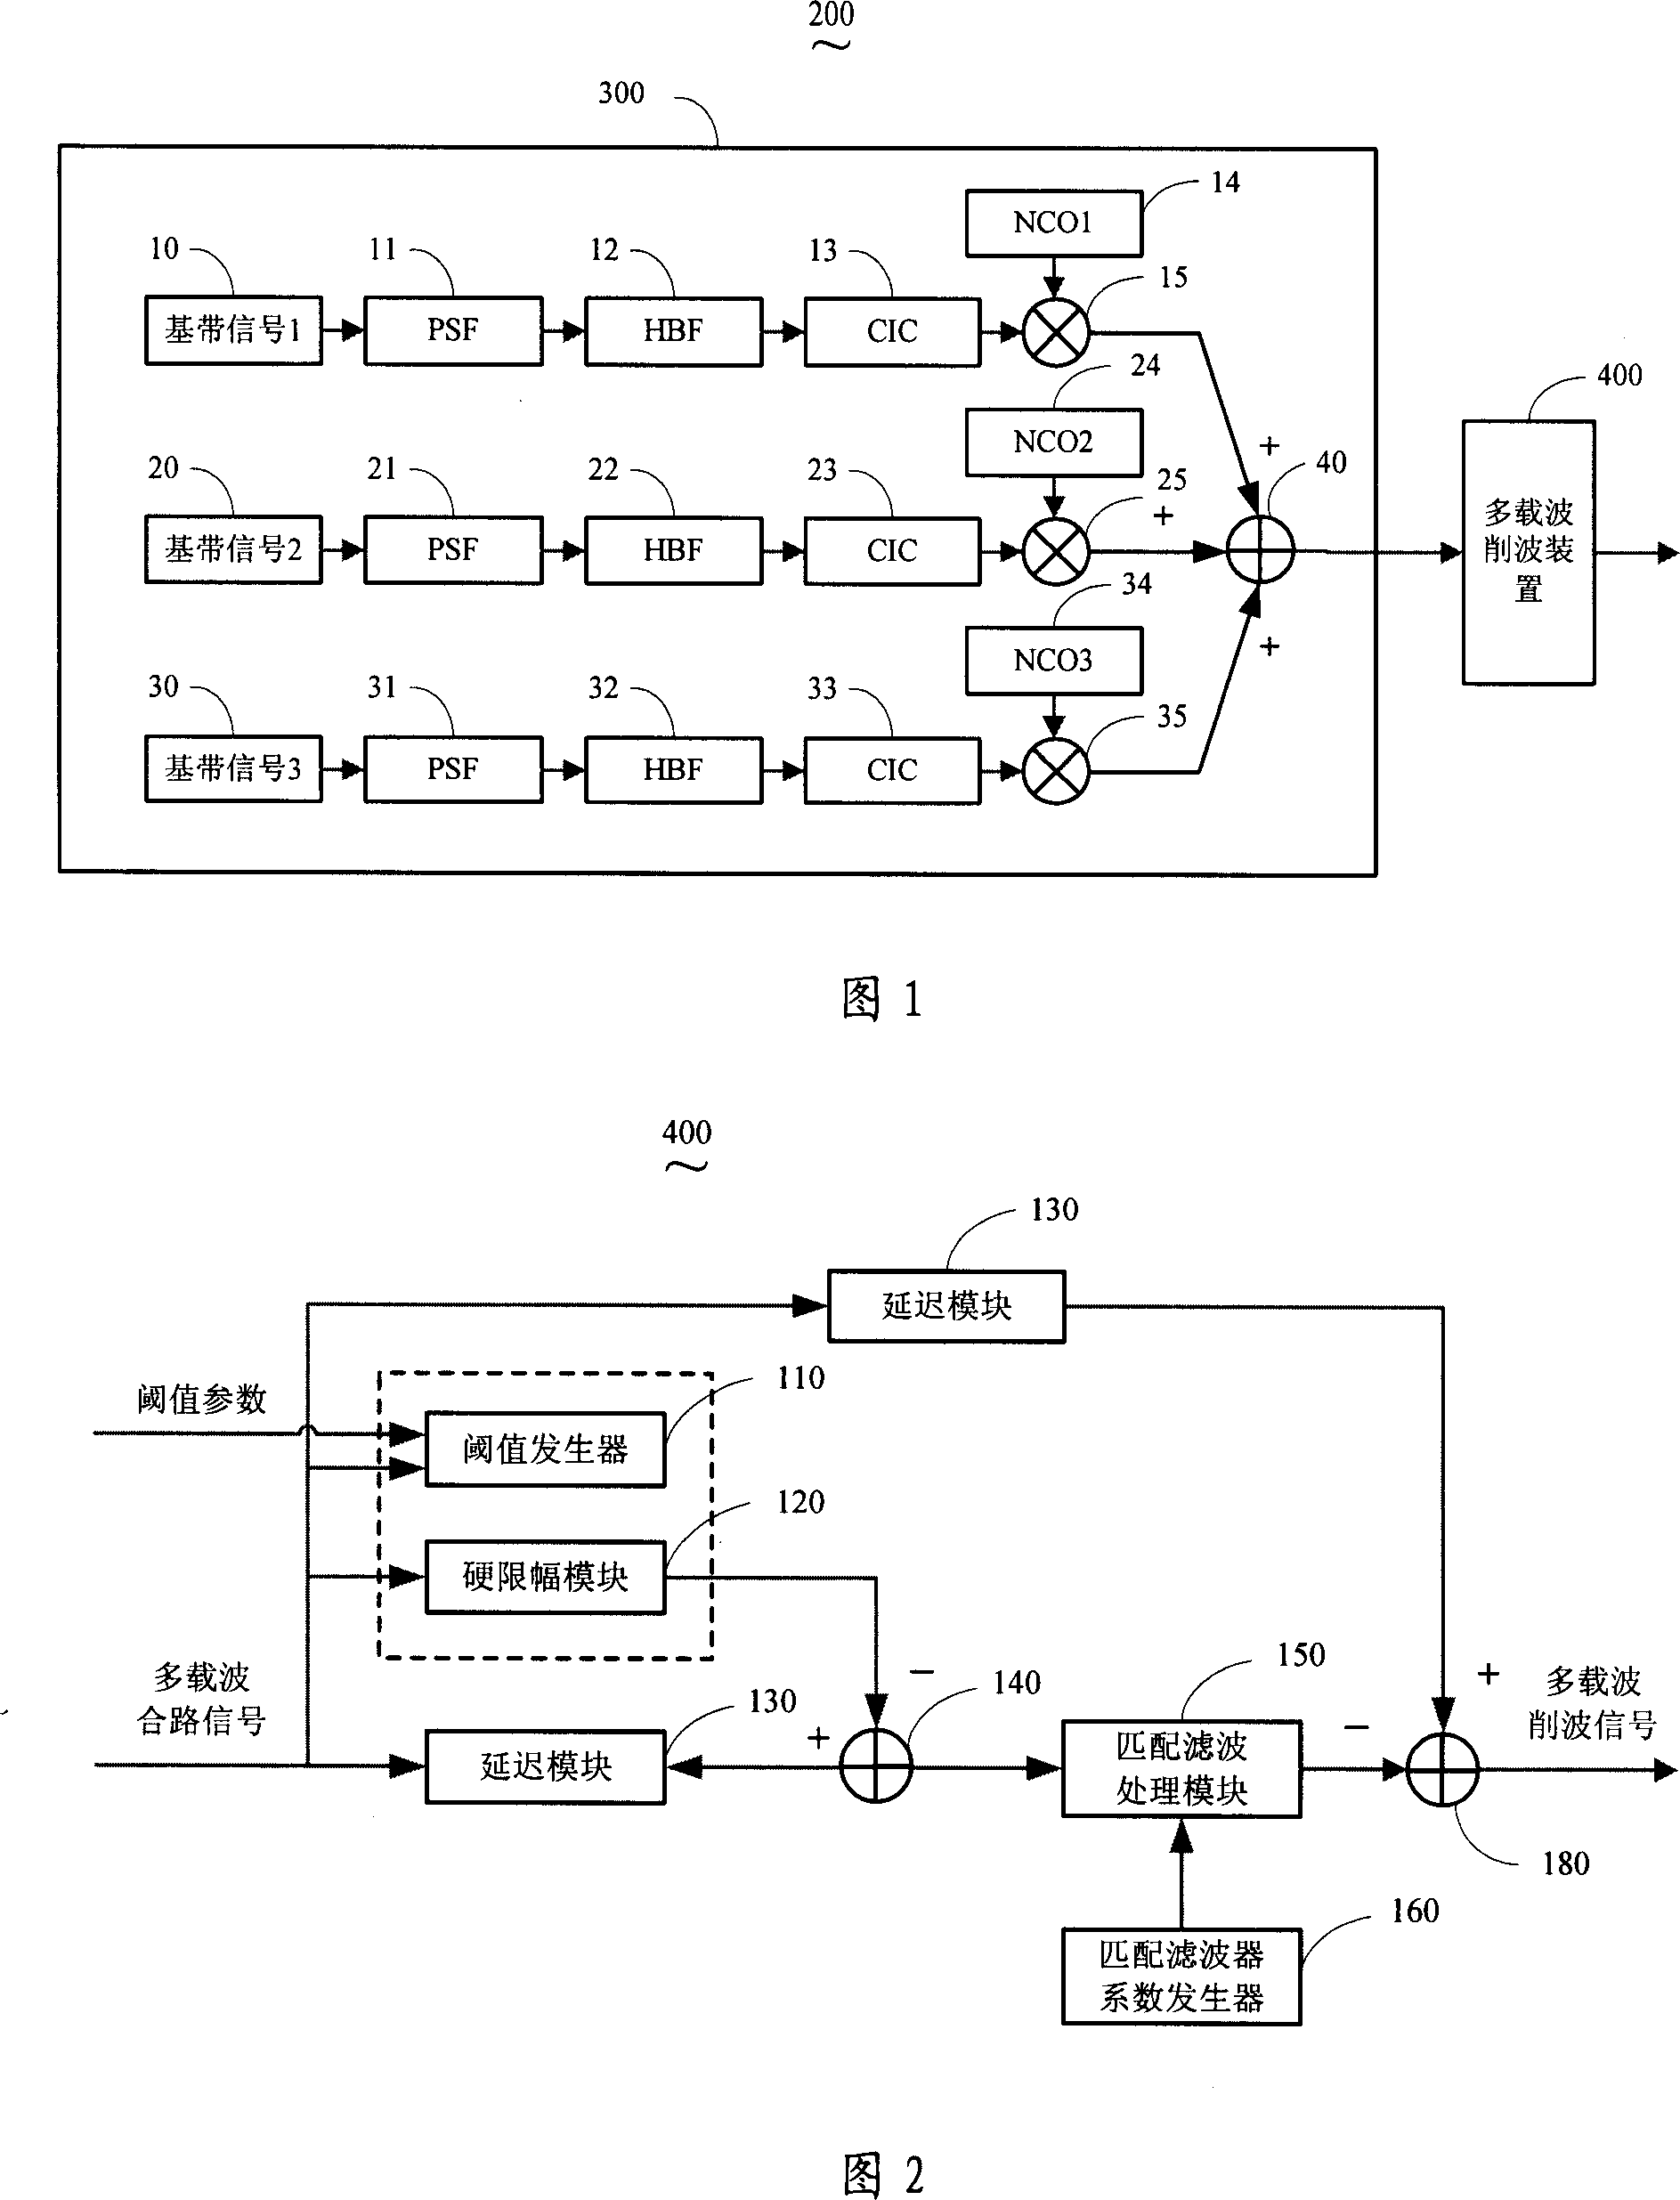 A multi-carrier communication system